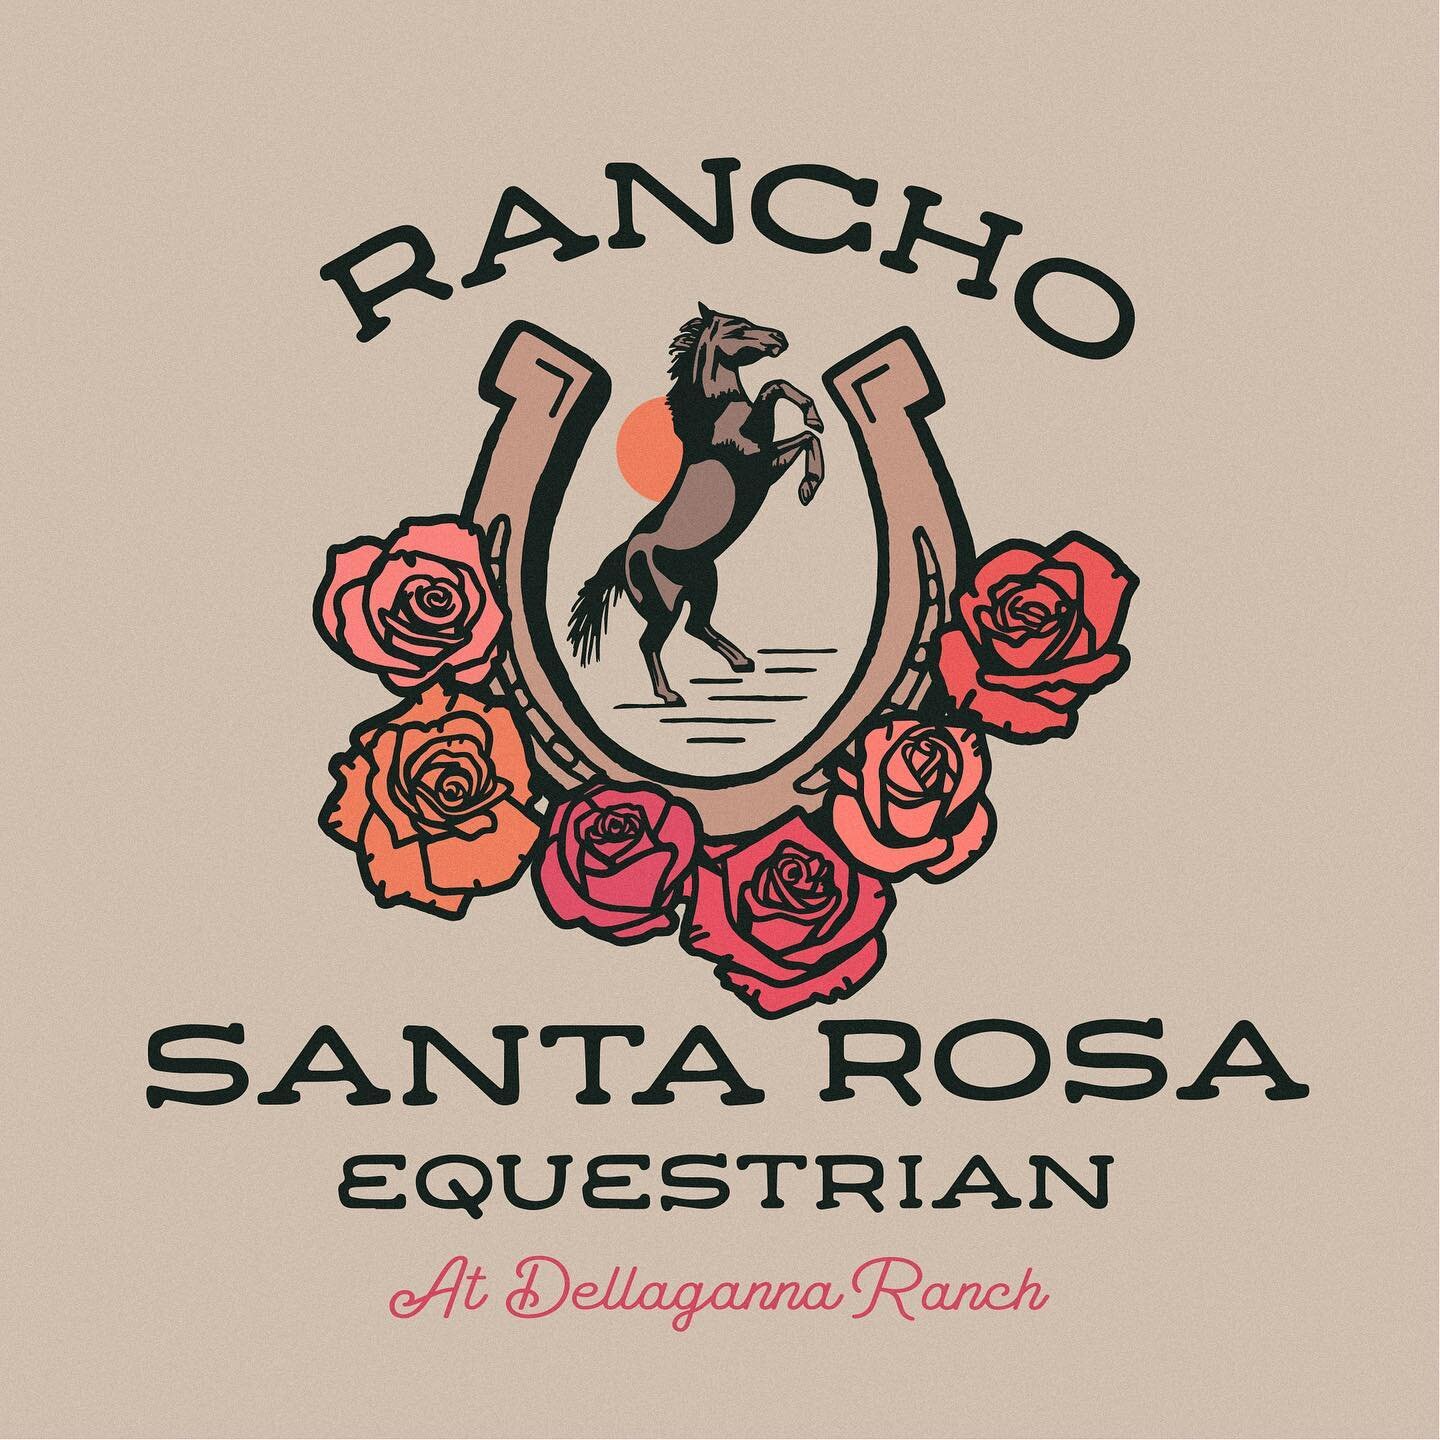 Logo for Rancho Santa Rosa Equestrian, coming soon to the Central Coast. Really excited about the vibe of this one and to share more soon 🐎
.
.
.
.
#branding #brandidentity #designbrew #distressedunrest #logodesigner #logodesigns #logoinspirations #